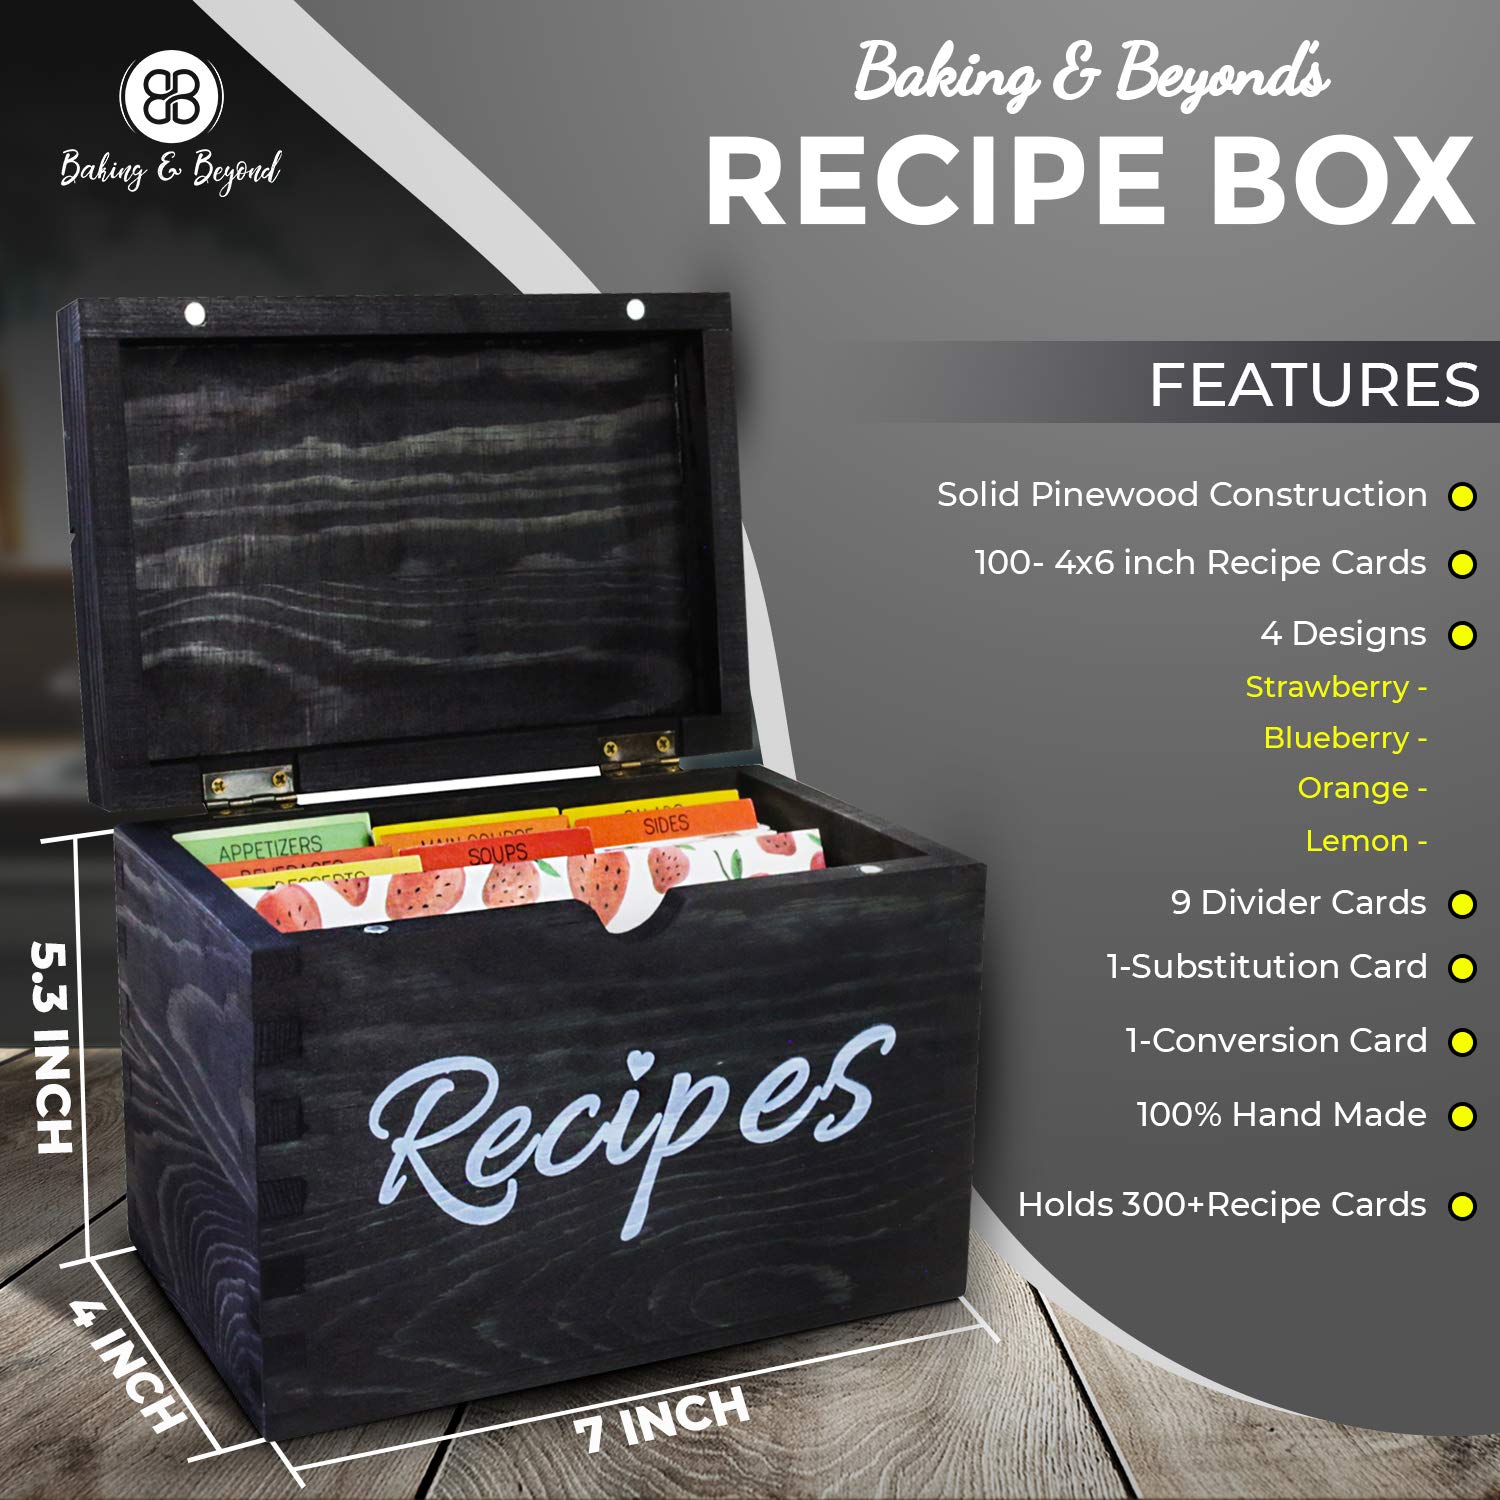 Baking & Beyond Recipe Box, Recipe Card Holder Box with 100 4x6 inch Recipe Cards, 9 Dividers, 1 Conversion & 1 Substitution Card, Vintage Style Solid Pinewood Recipe Organizer (7x5.3x4, Black)